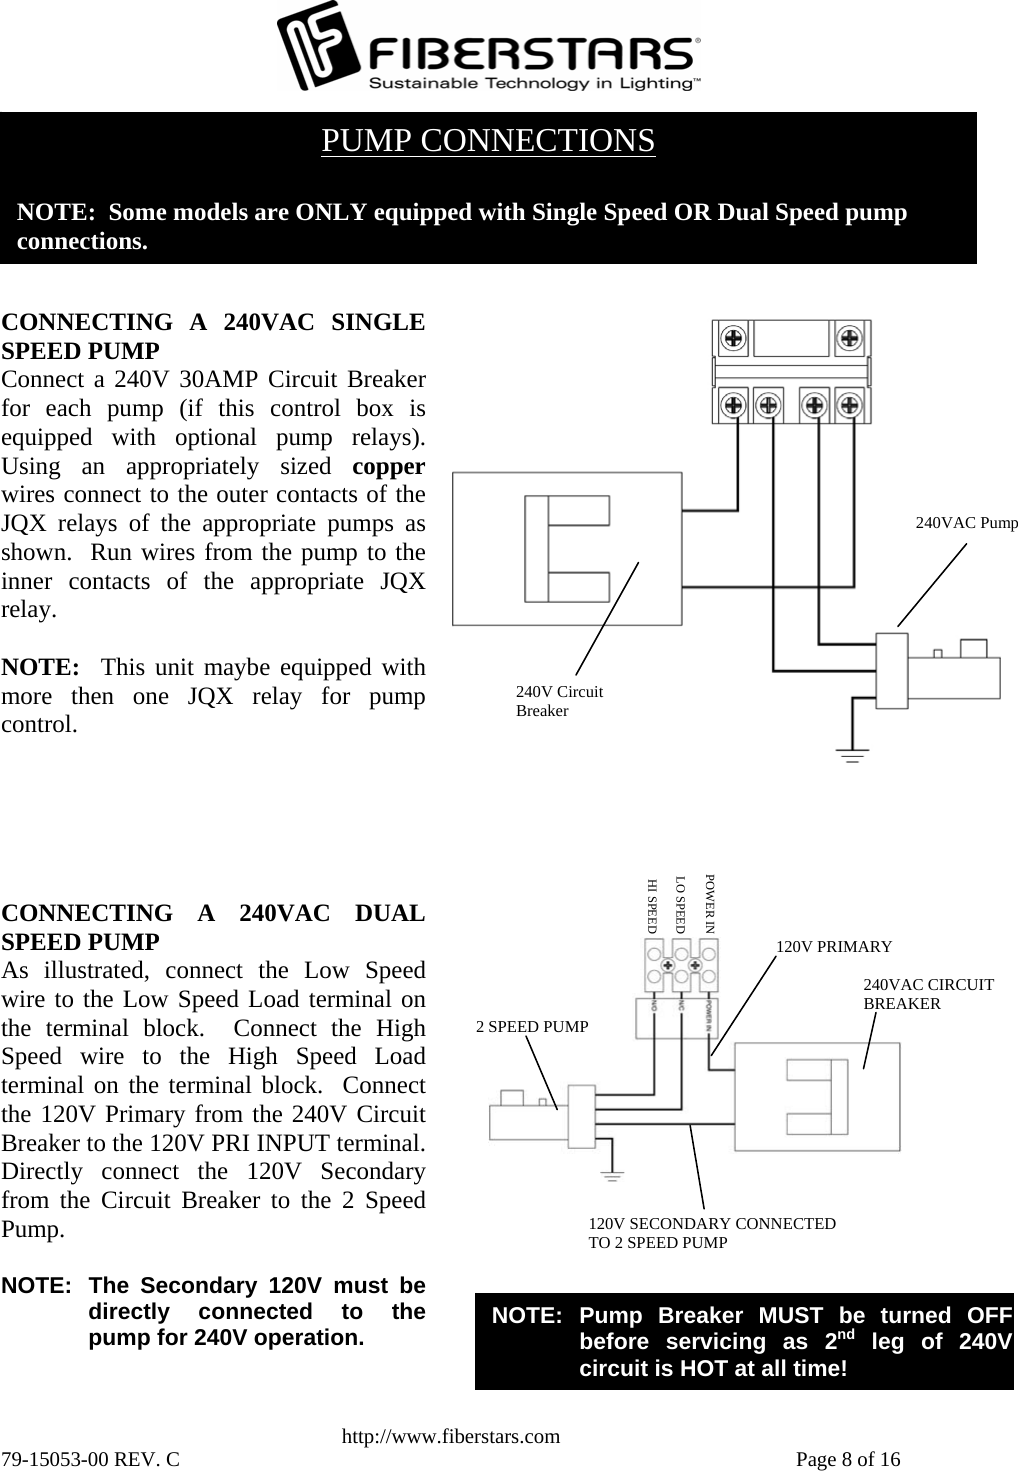   http://www.fiberstars.com 79-15053-00 REV. C    Page 8 of 16 HI SPEEDLO SPEEDPOWER IN120V SECONDARY CONNECTED TO 2 SPEED PUMP 240VAC CIRCUIT BREAKER 2 SPEED PUMP 120V PRIMARY NOTE: Pump Breaker MUST be turned OFFbefore servicing as 2nd leg of 240Vcircuit is HOT at all time! CONNECTING A 240VAC DUALSPEED PUMP As illustrated, connect the Low Speedwire to the Low Speed Load terminal onthe terminal block.  Connect the HighSpeed wire to the High Speed Loadterminal on the terminal block.  Connectthe 120V Primary from the 240V CircuitBreaker to the 120V PRI INPUT terminal.Directly connect the 120V Secondaryfrom the Circuit Breaker to the 2 SpeedPump.  NOTE:  The Secondary 120V must bedirectly connected to thepump for 240V operation. 240VAC Pump240V Circuit Breaker CONNECTING A 240VAC SINGLESPEED PUMP Connect a 240V 30AMP Circuit Breakerfor each pump (if this control box isequipped with optional pump relays).Using an appropriately sized copperwires connect to the outer contacts of theJQX relays of the appropriate pumps asshown.  Run wires from the pump to theinner contacts of the appropriate JQXrelay.  NOTE:  This unit maybe equipped withmore then one JQX relay for pumpcontrol. PUMP CONNECTIONS  NOTE:  Some models are ONLY equipped with Single Speed OR Dual Speed pump  connections. 